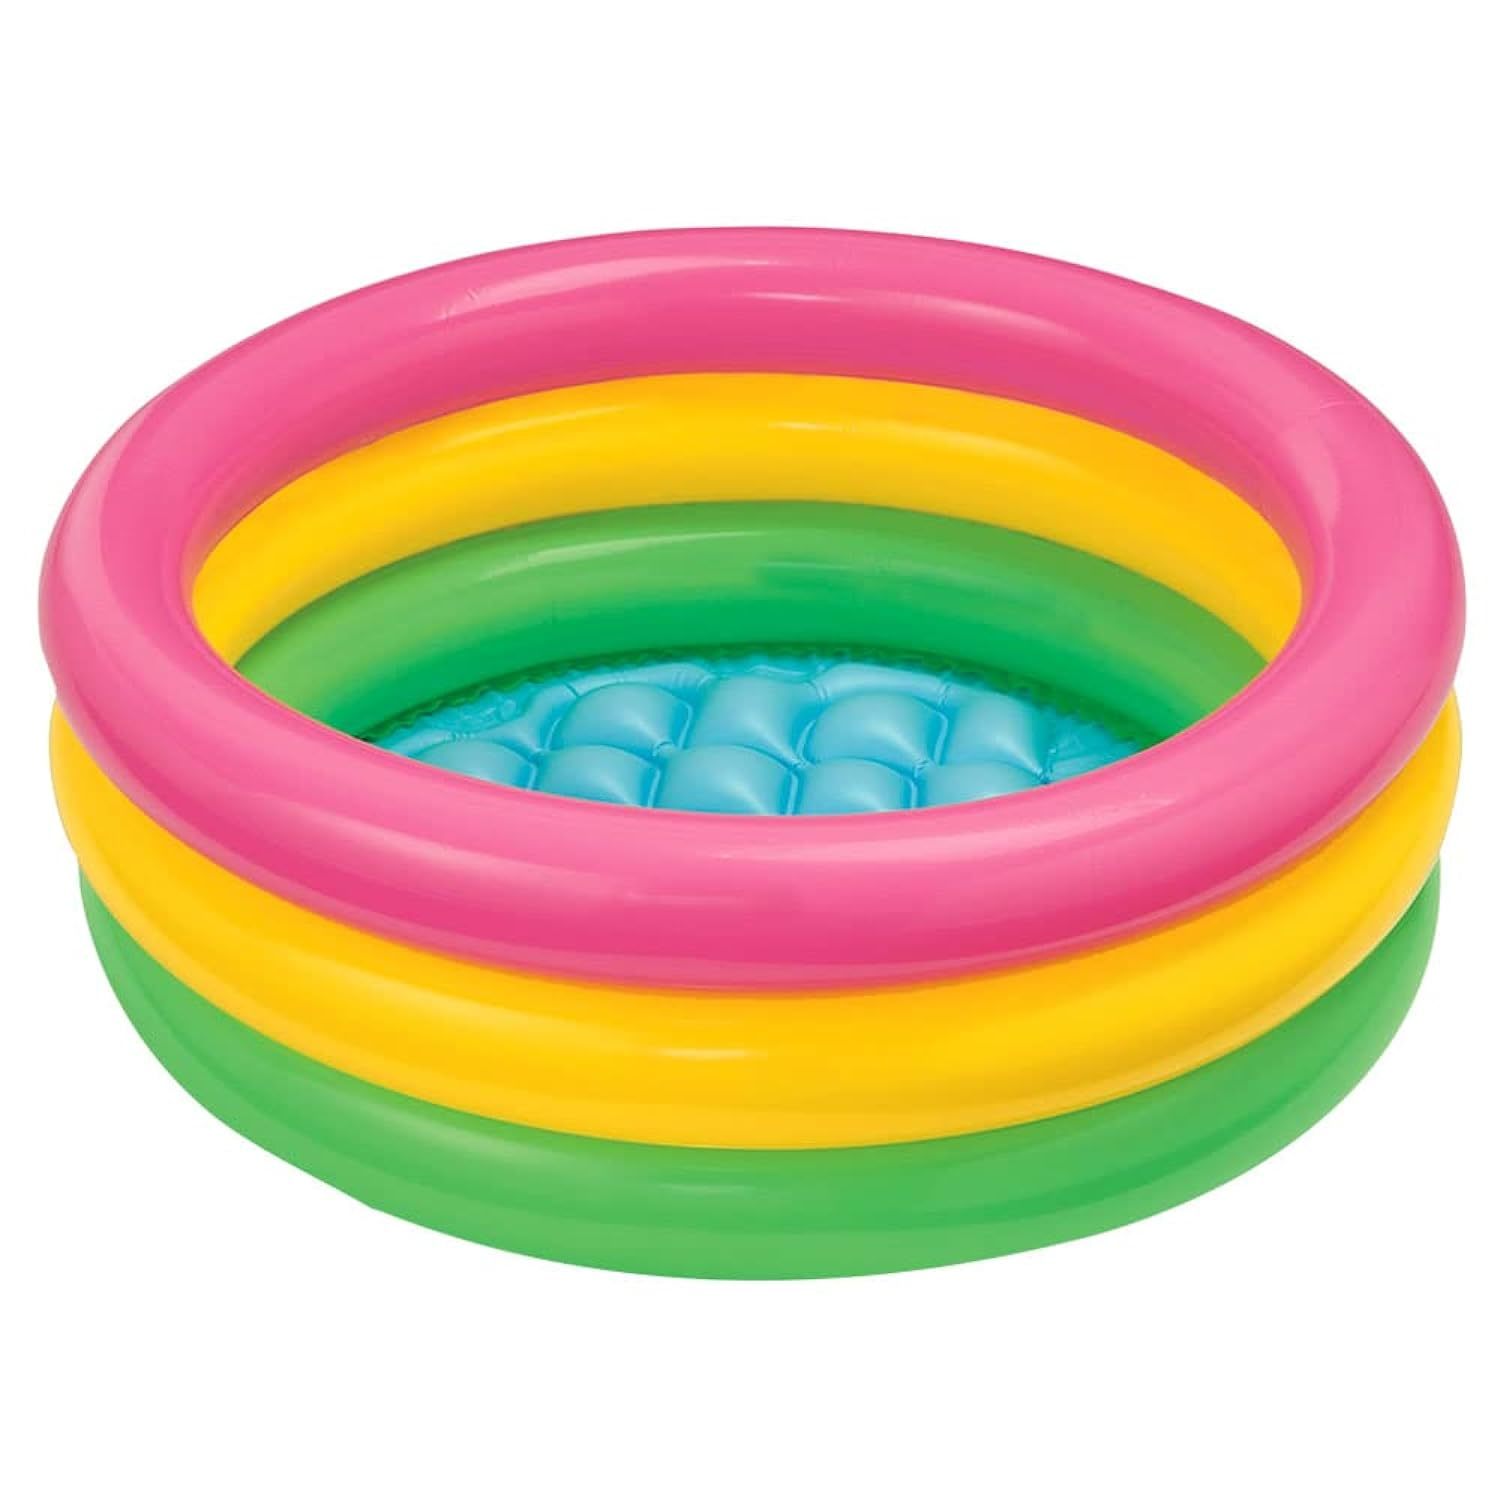 Primary image for Intex Sunset Glow Baby Pool (34 in x 10 in)